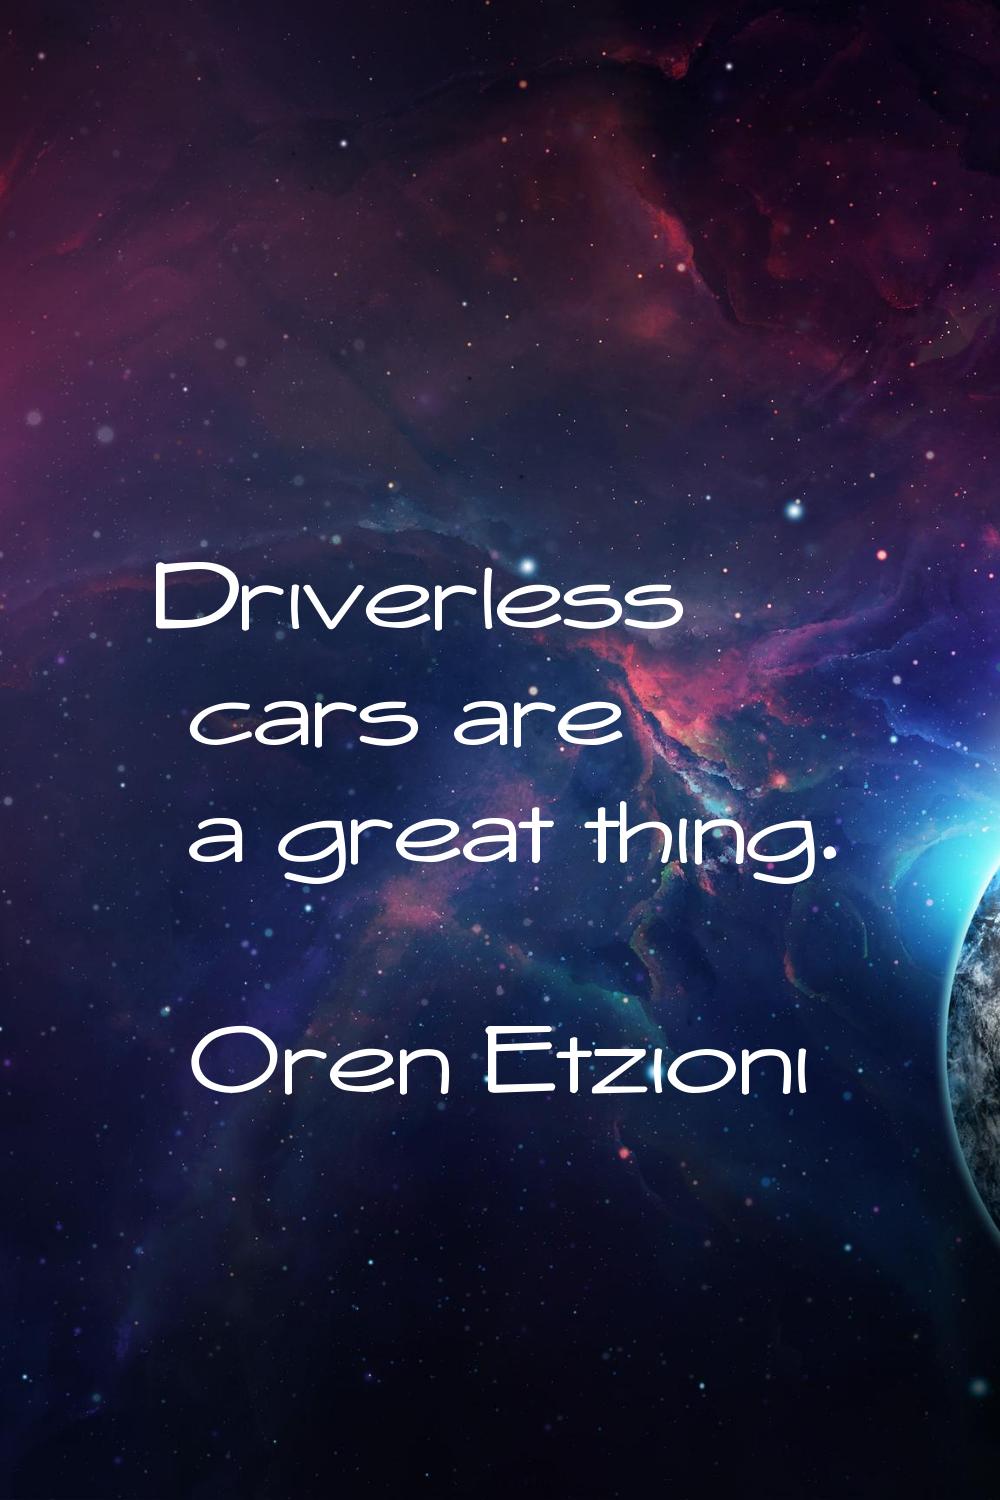 Driverless cars are a great thing.